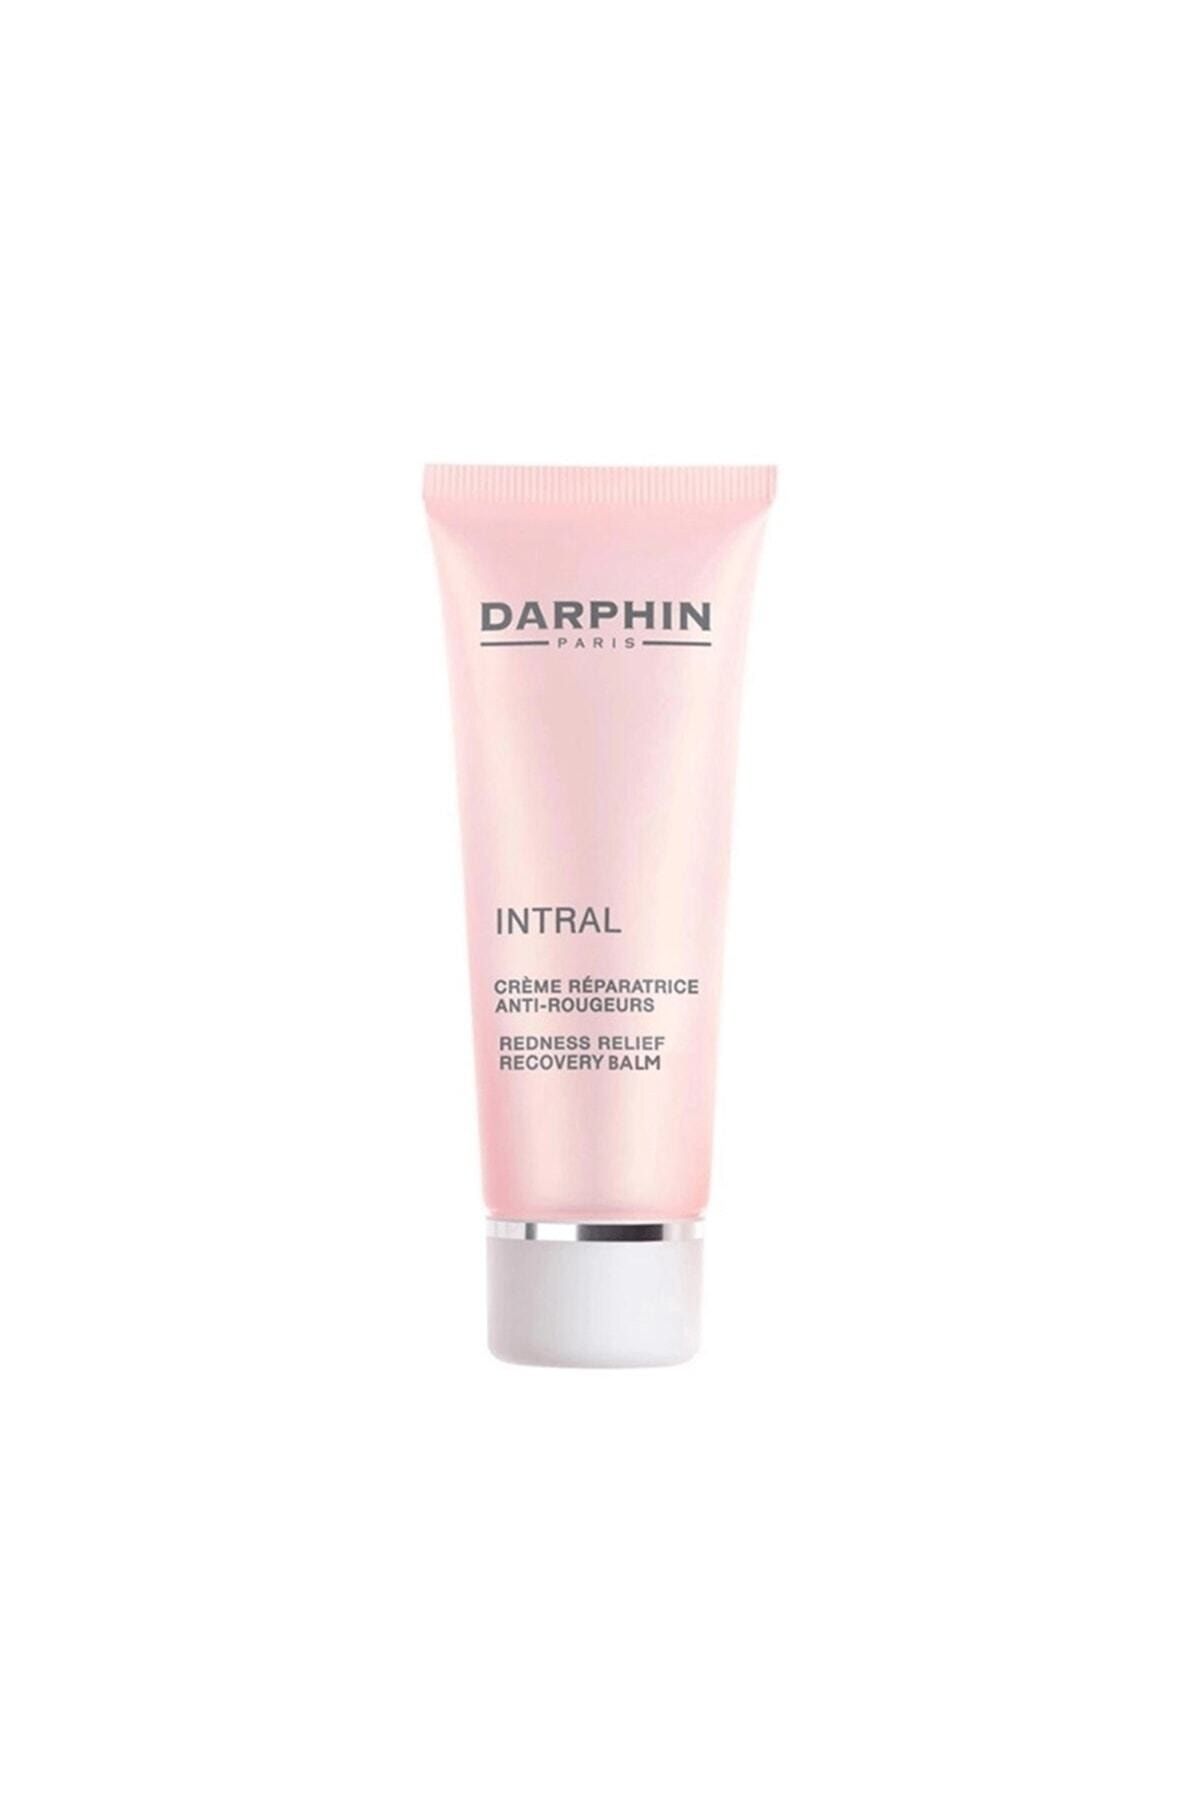 Darphin Intral Redness Relief Recovery Balm 50 ml Tube